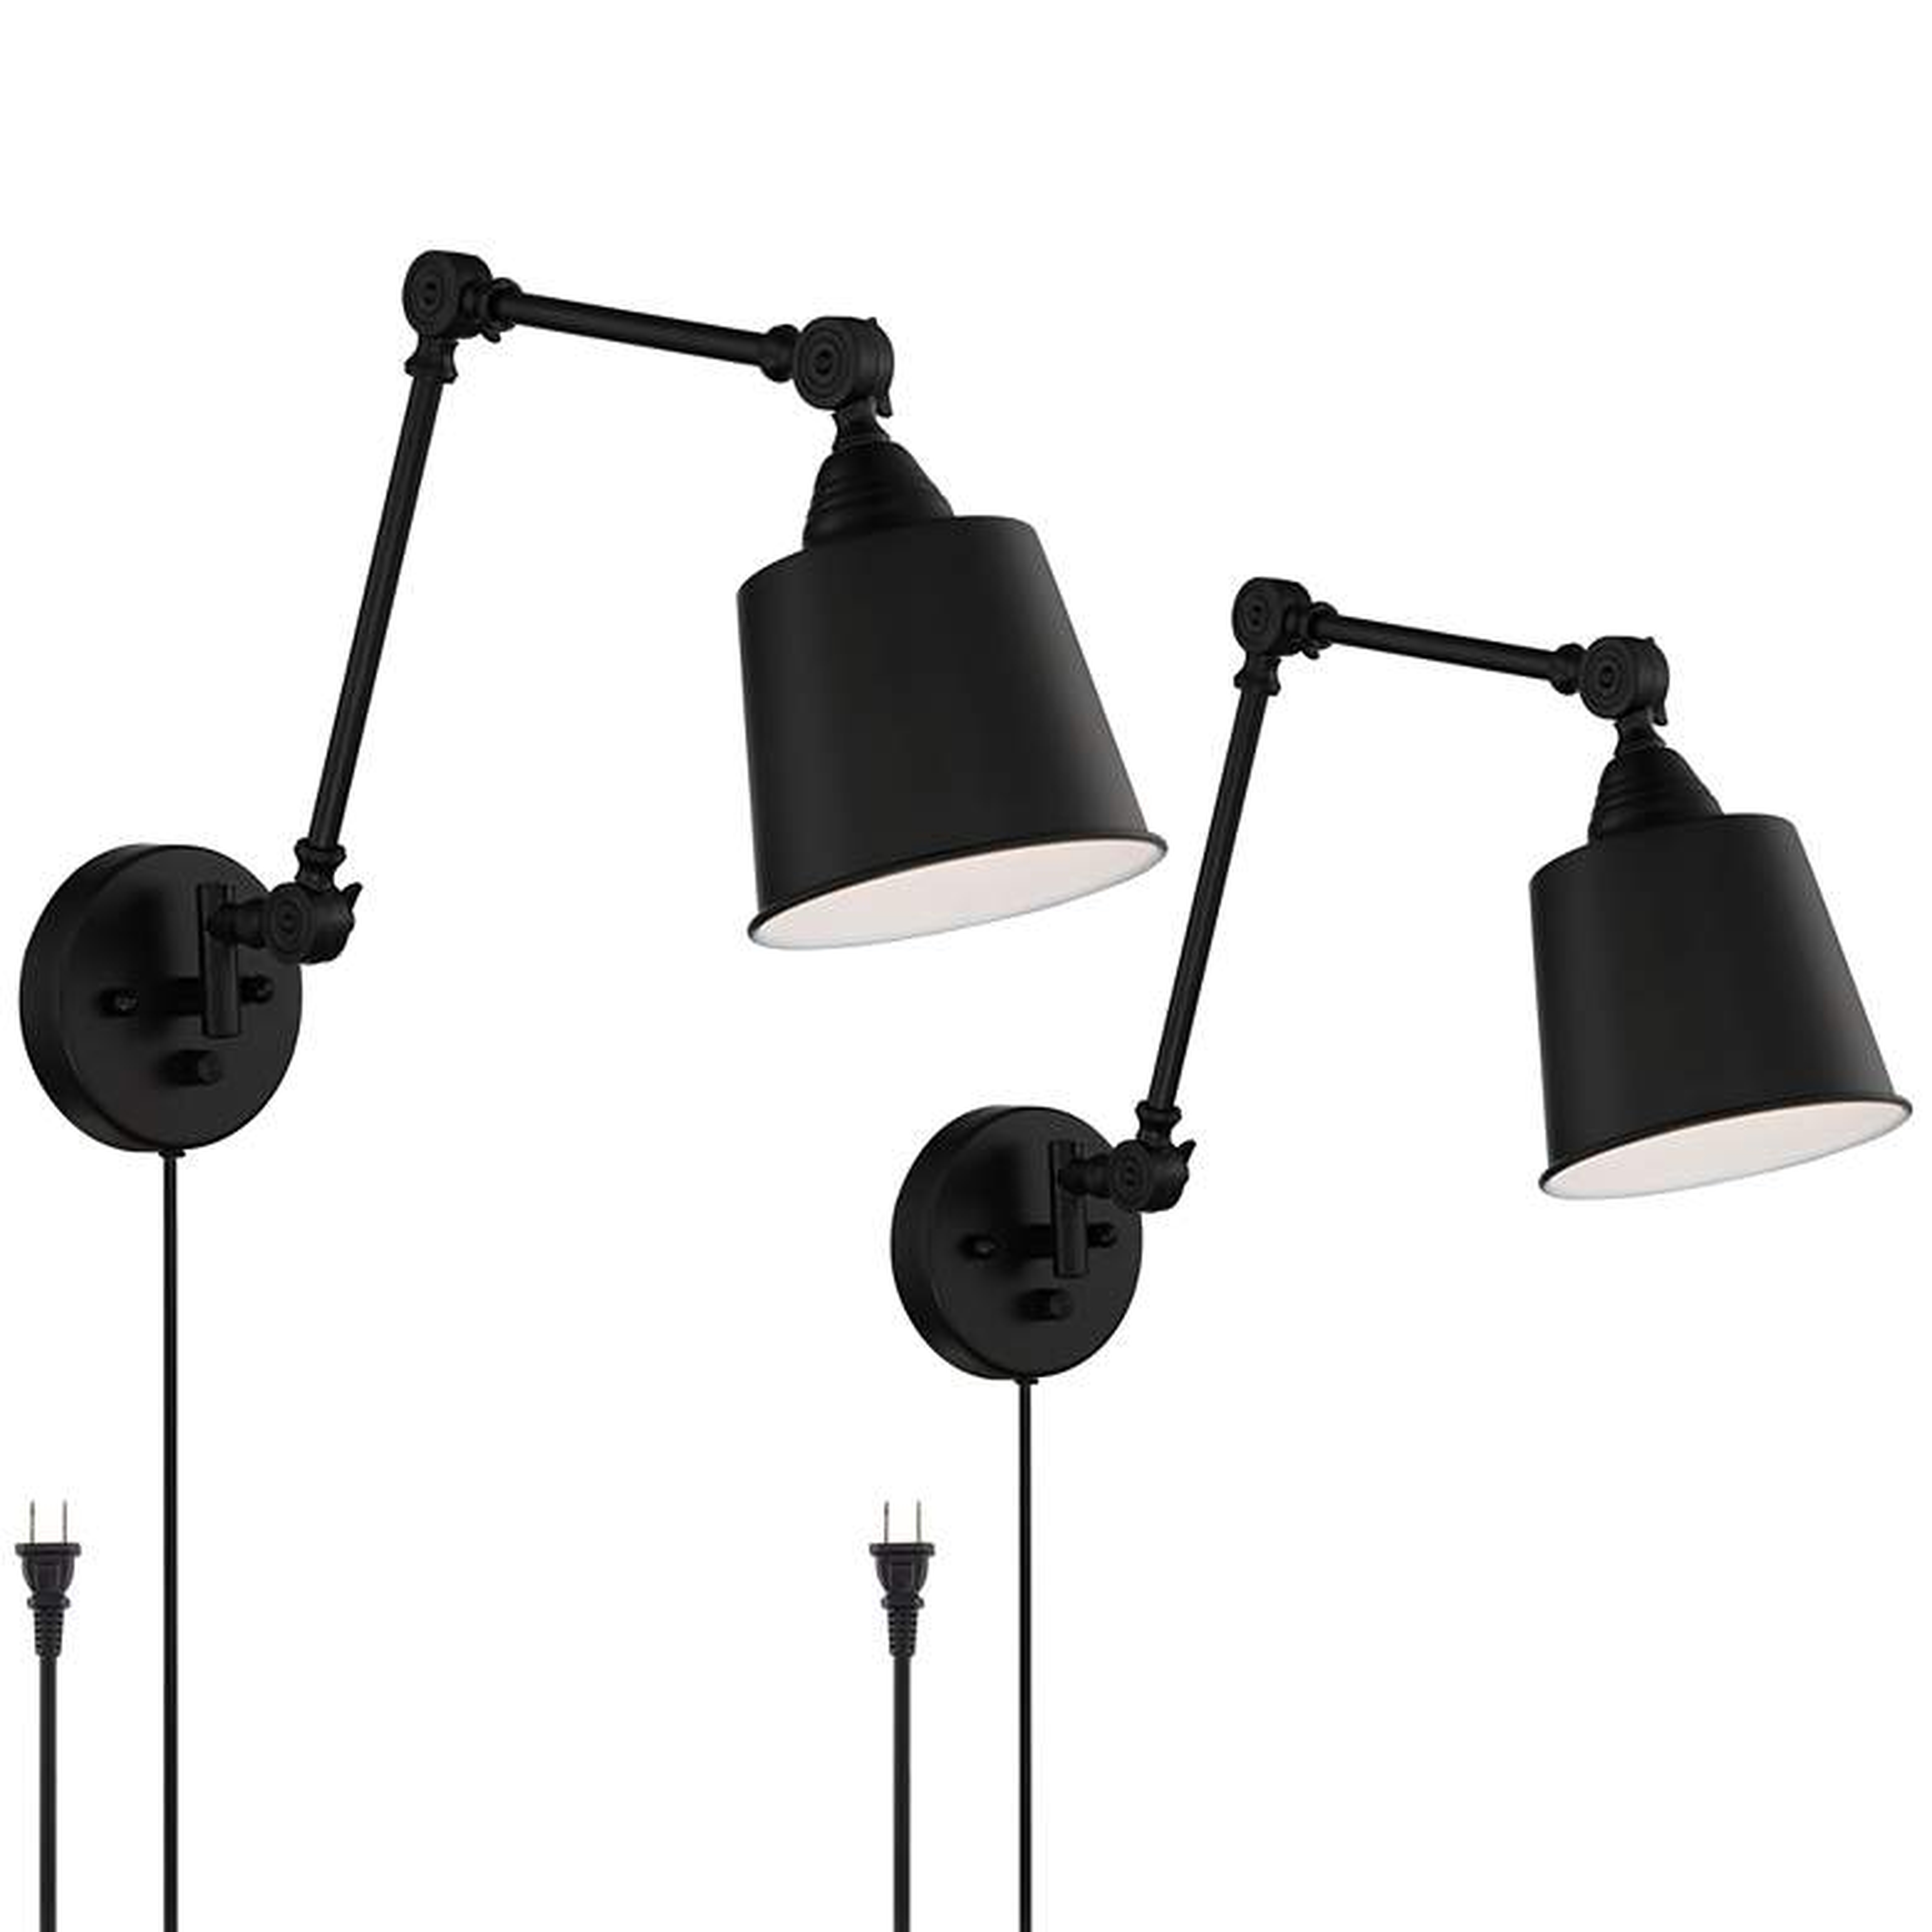 Mendes Black Finish 12 1/2" High Plug-In Wall Lamps Set of 2 - Style # 88H06 - Lamps Plus